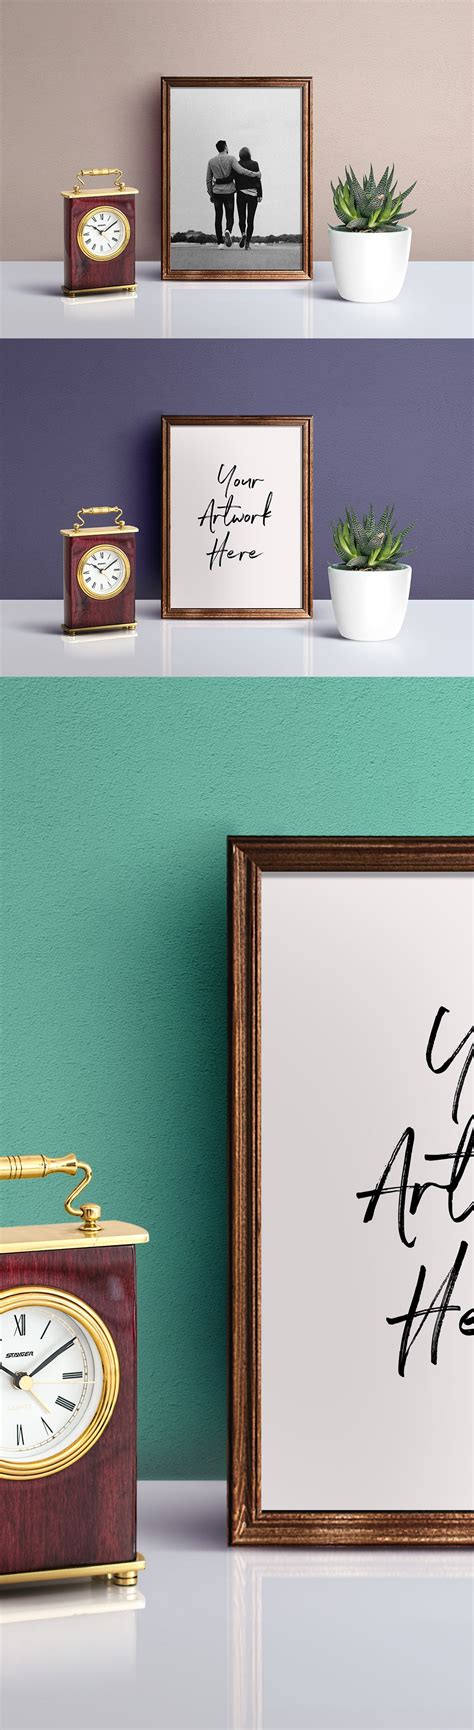 picture frame mockup psd  psd templates